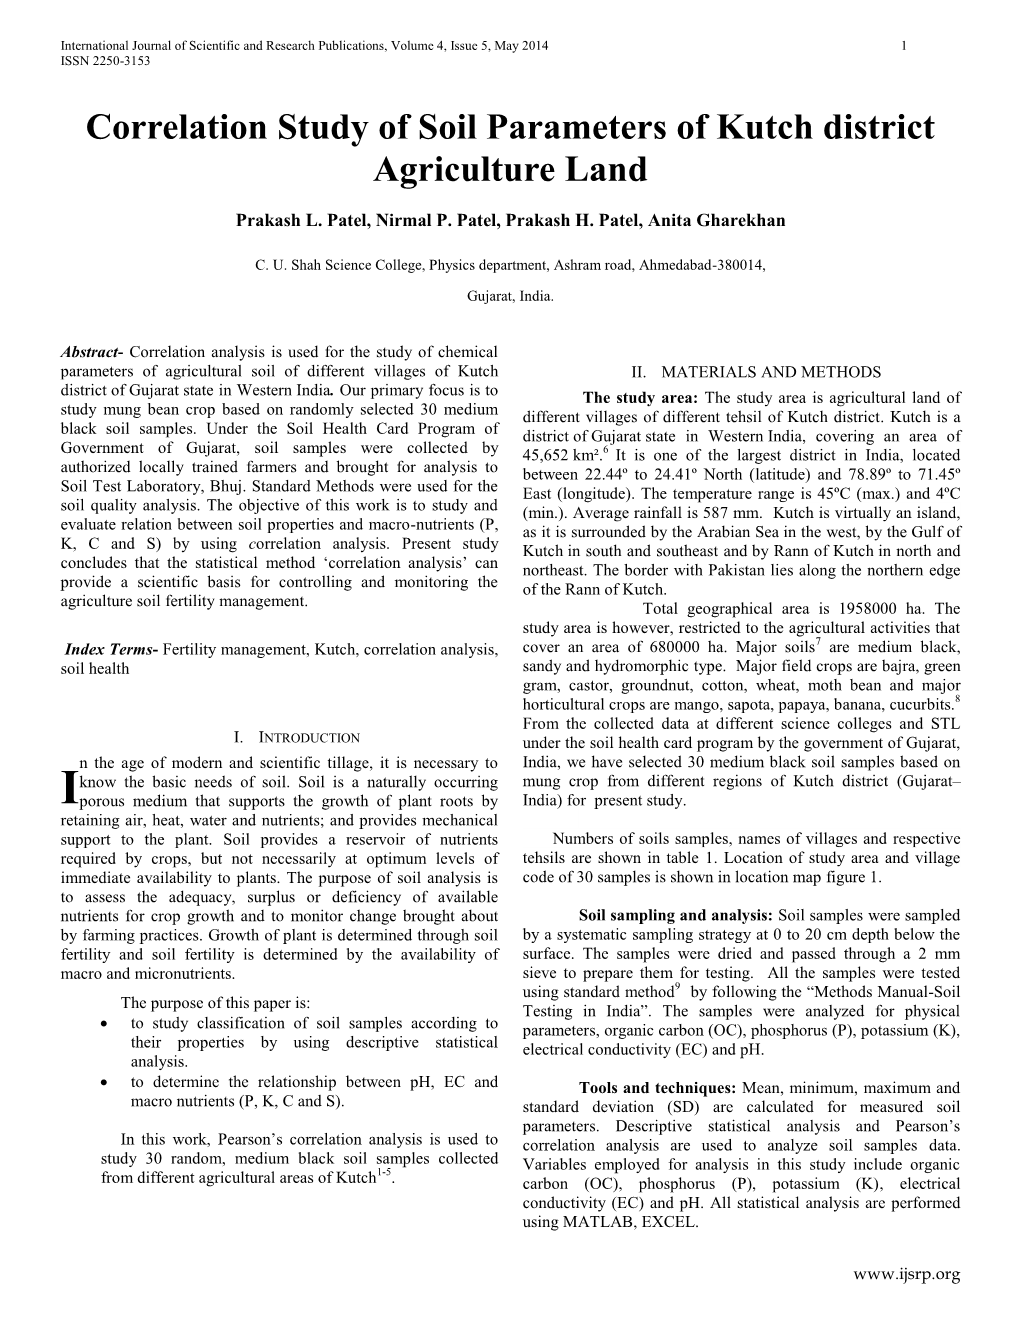 Correlation Study of Soil Parameters of Kutch District Agriculture Land